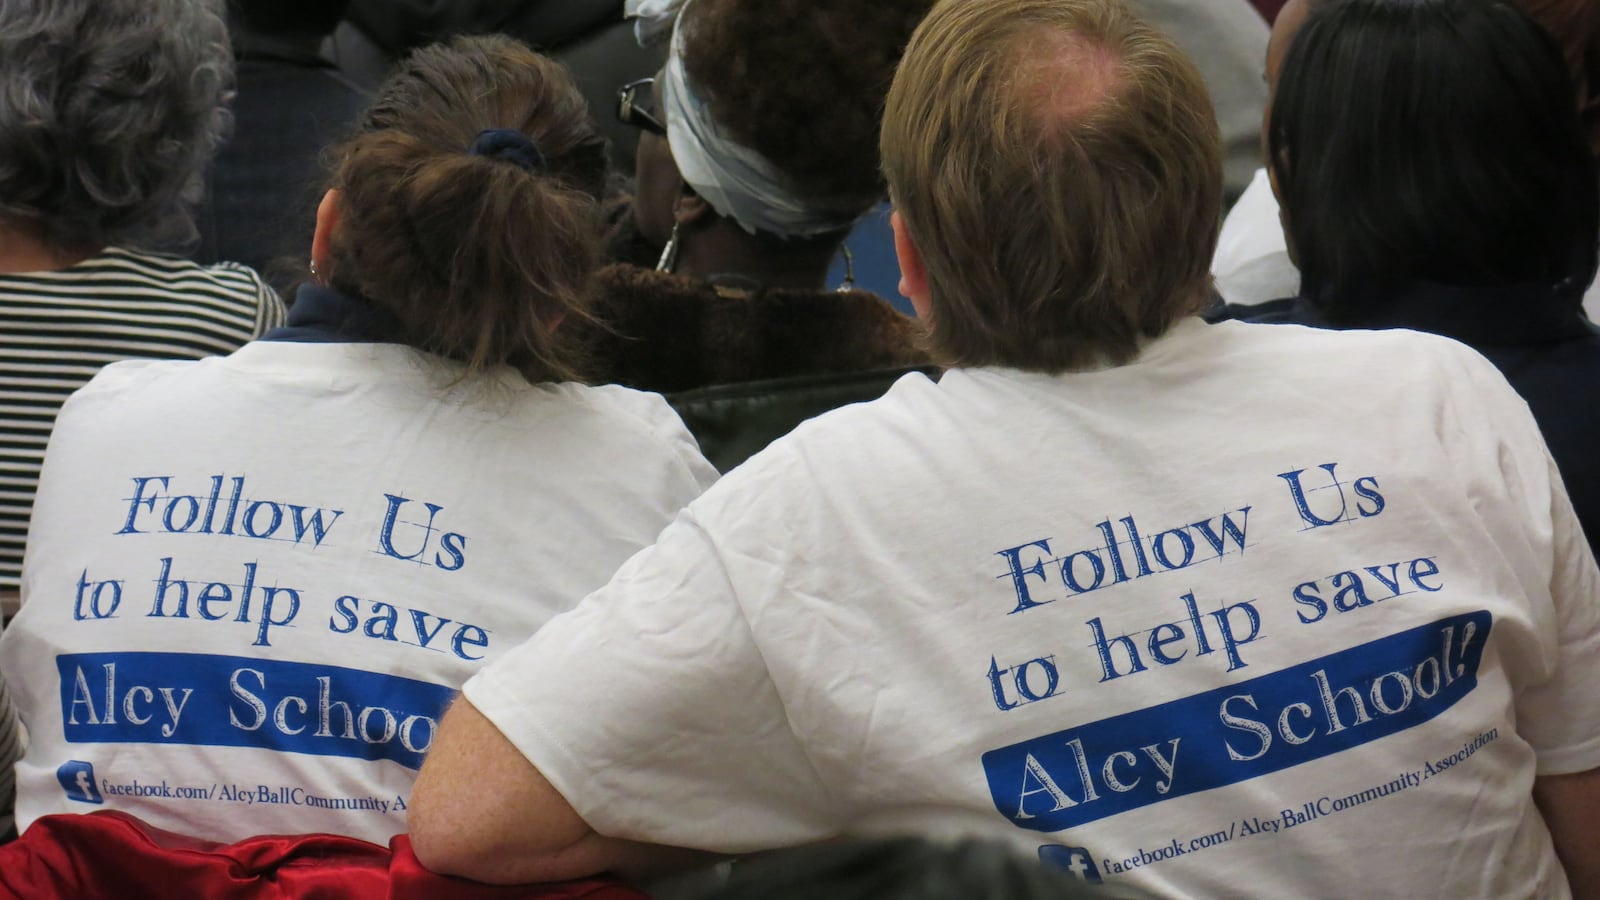 Follow us to help save Alcy Elementary.